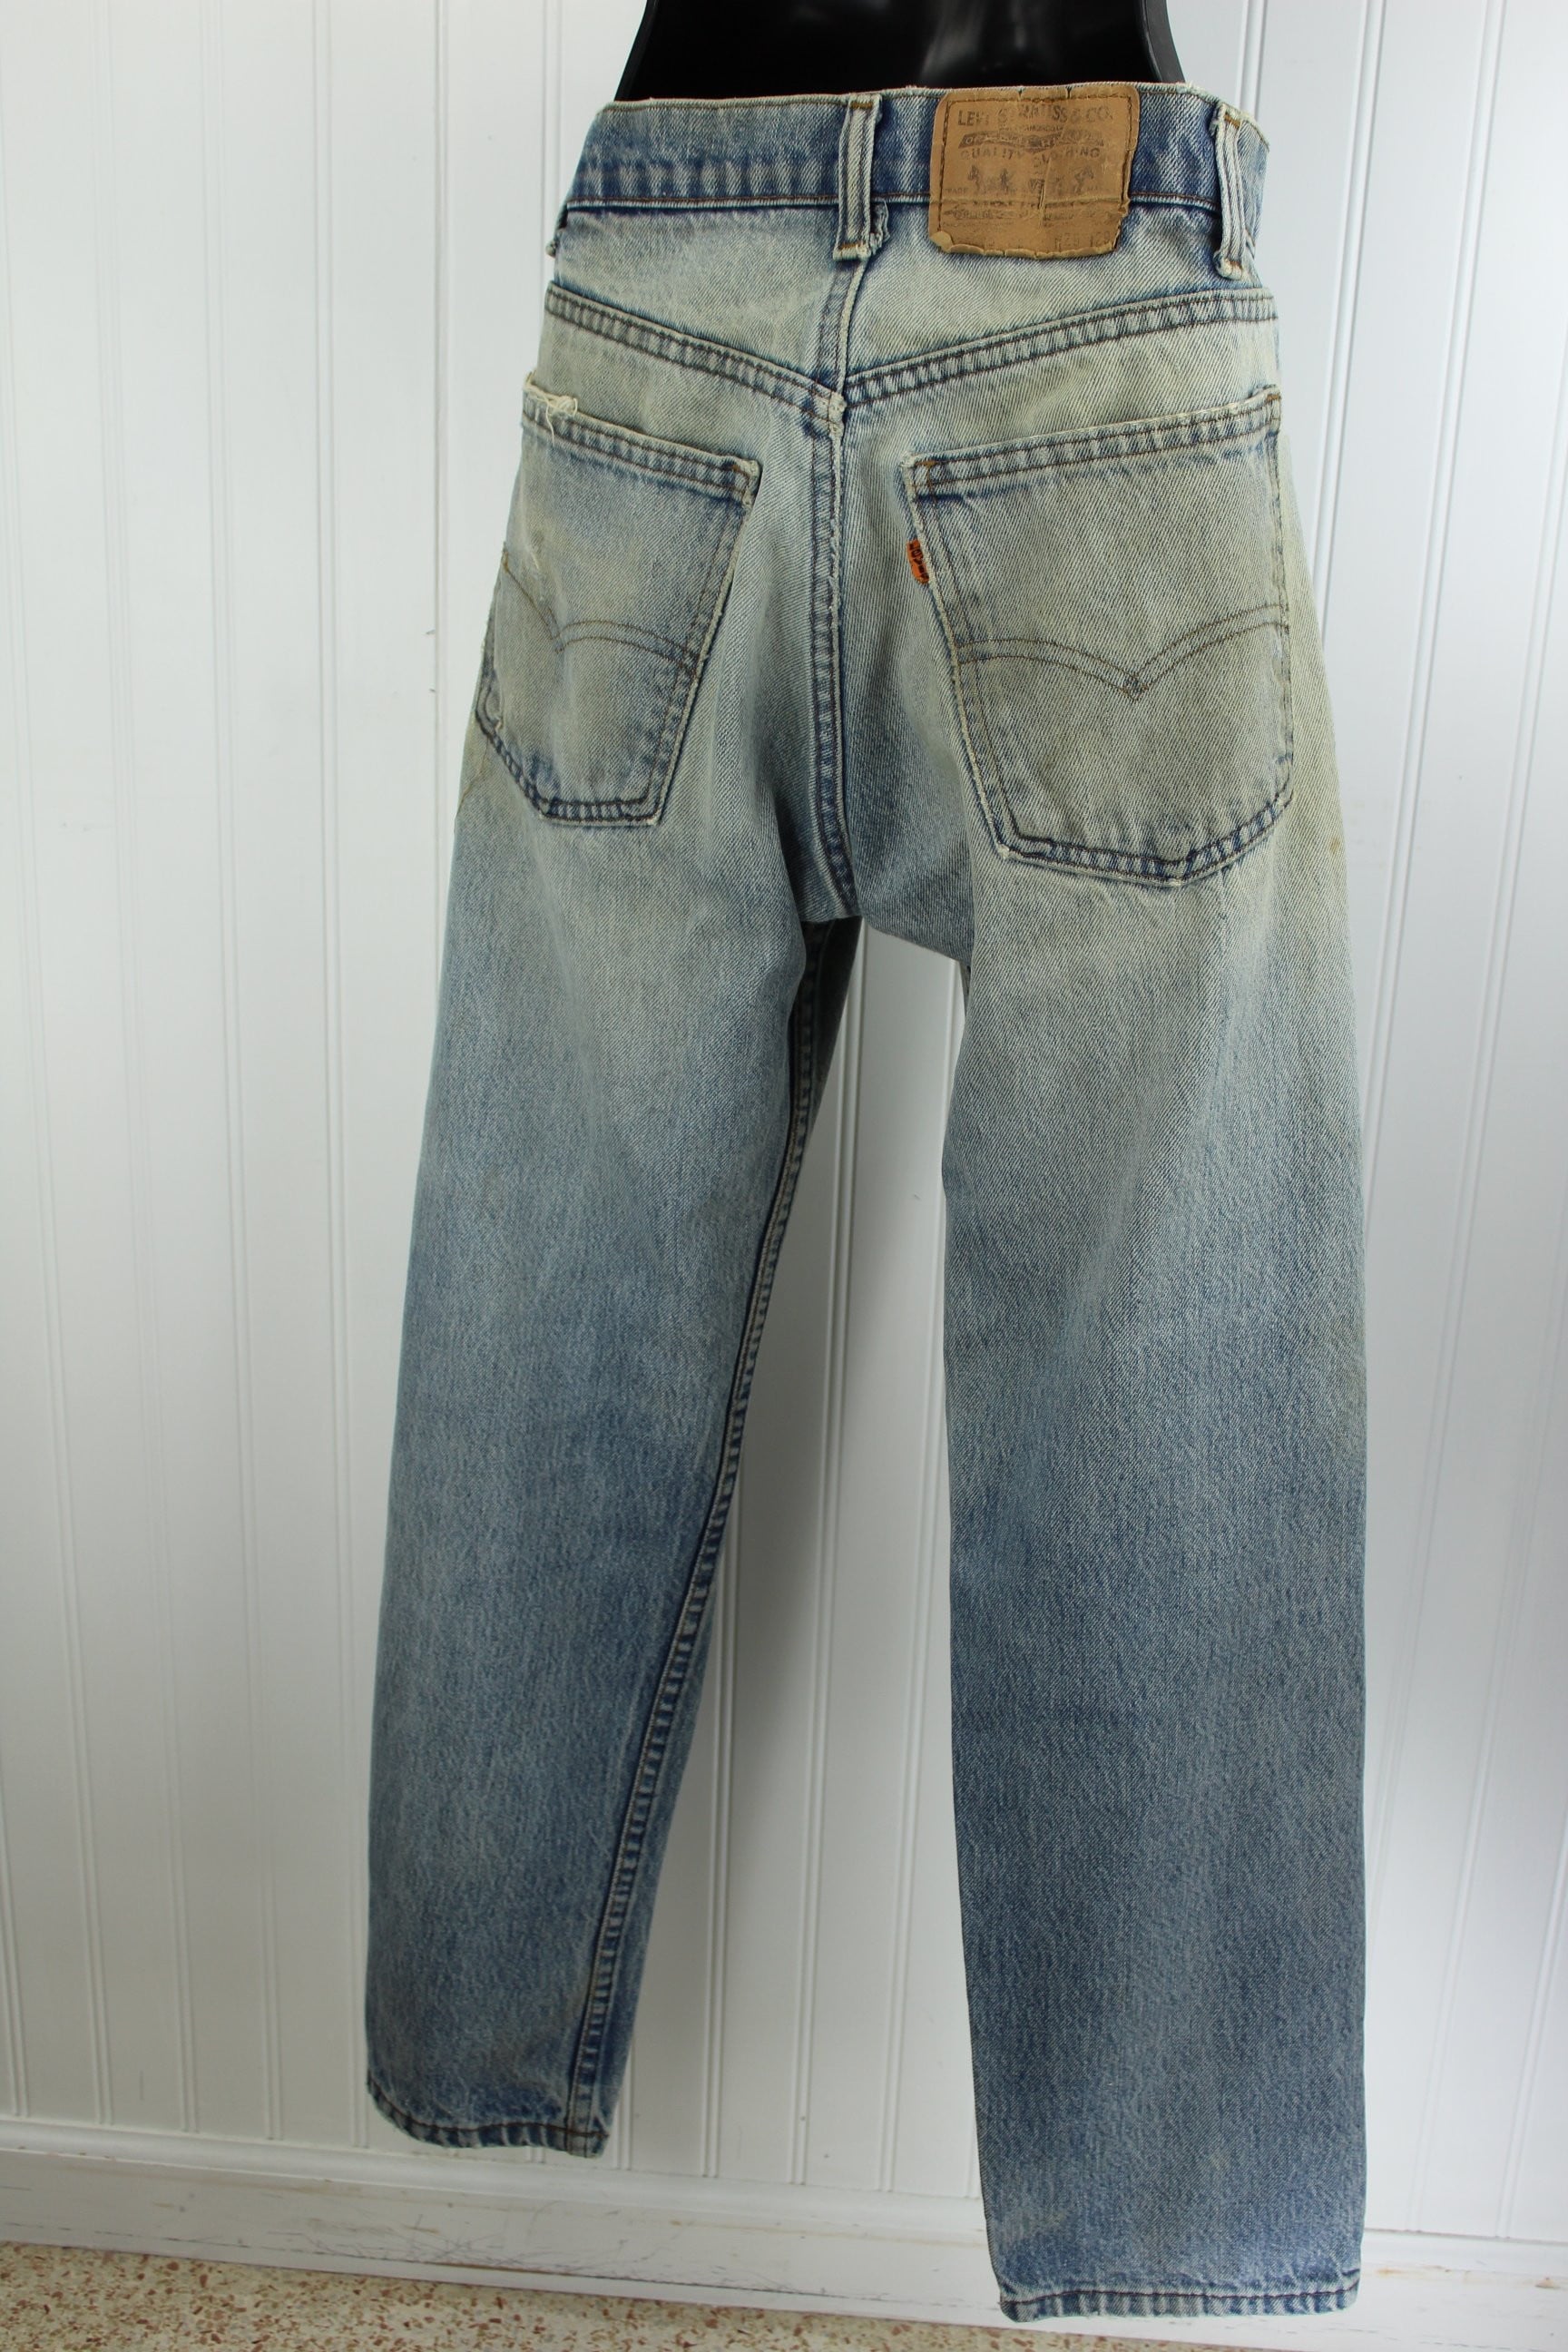 Vintage Levi's Skater Boarder Heavy Distress Grunge Jeans - Early 1990s - Orange Tab  collectible